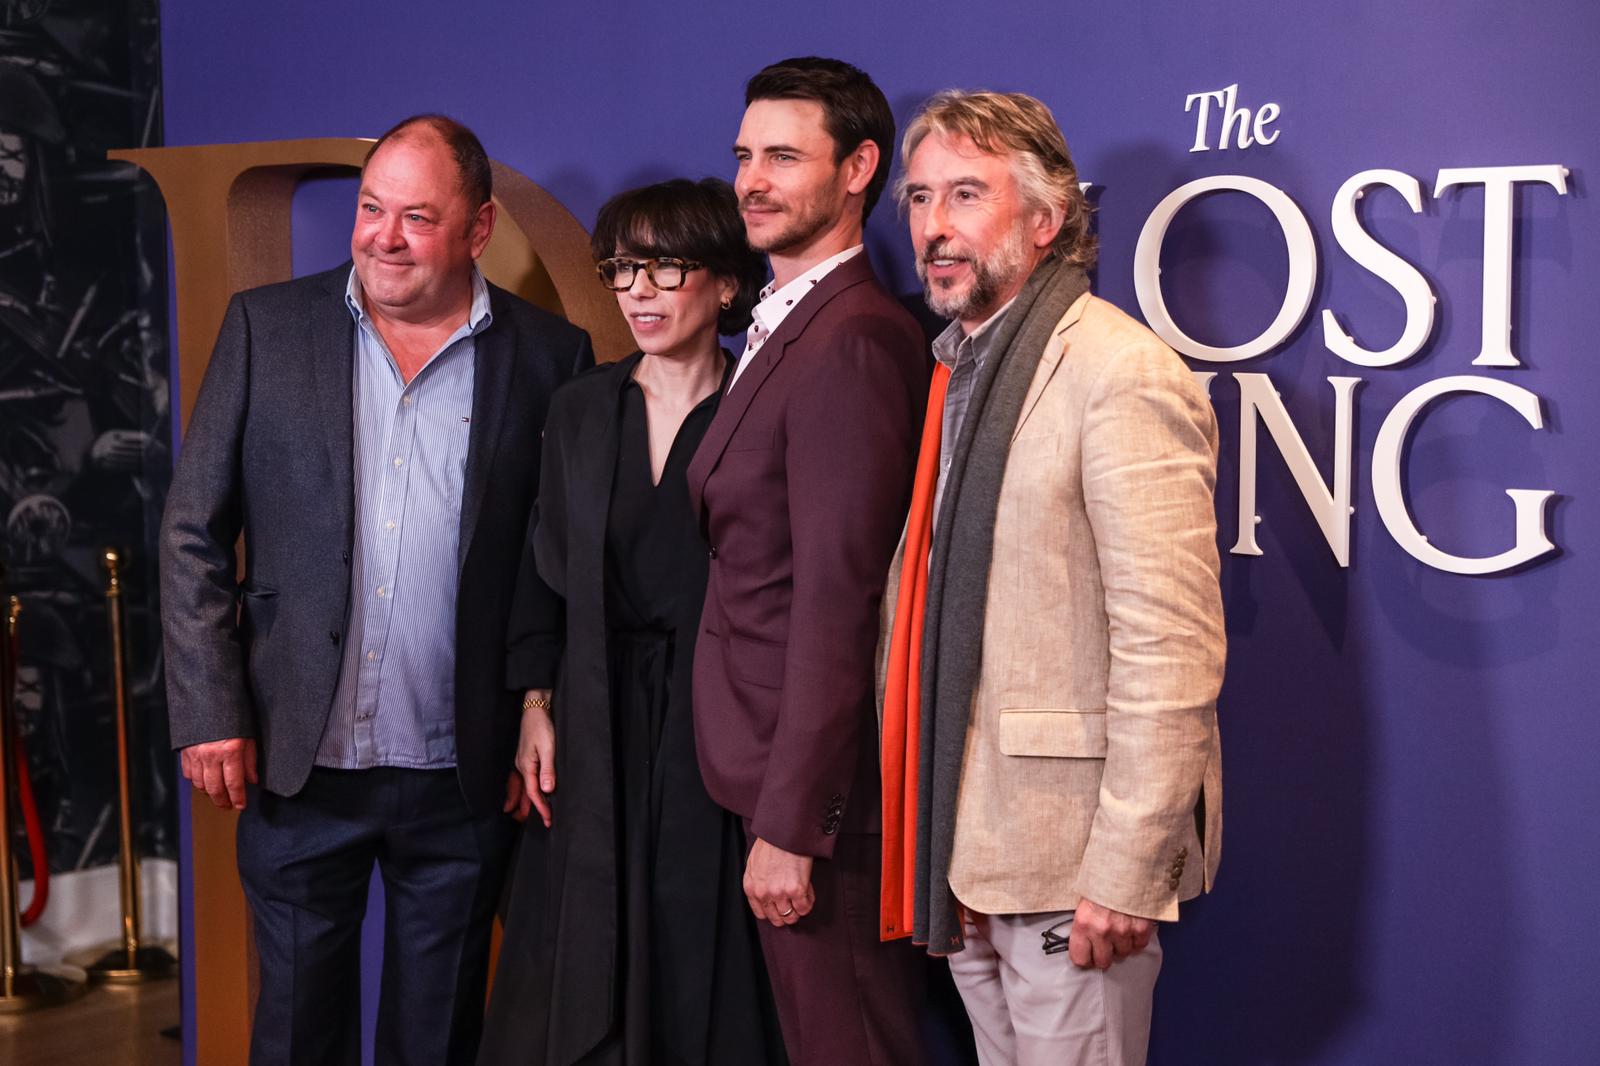 The Lost King Cast Premiere